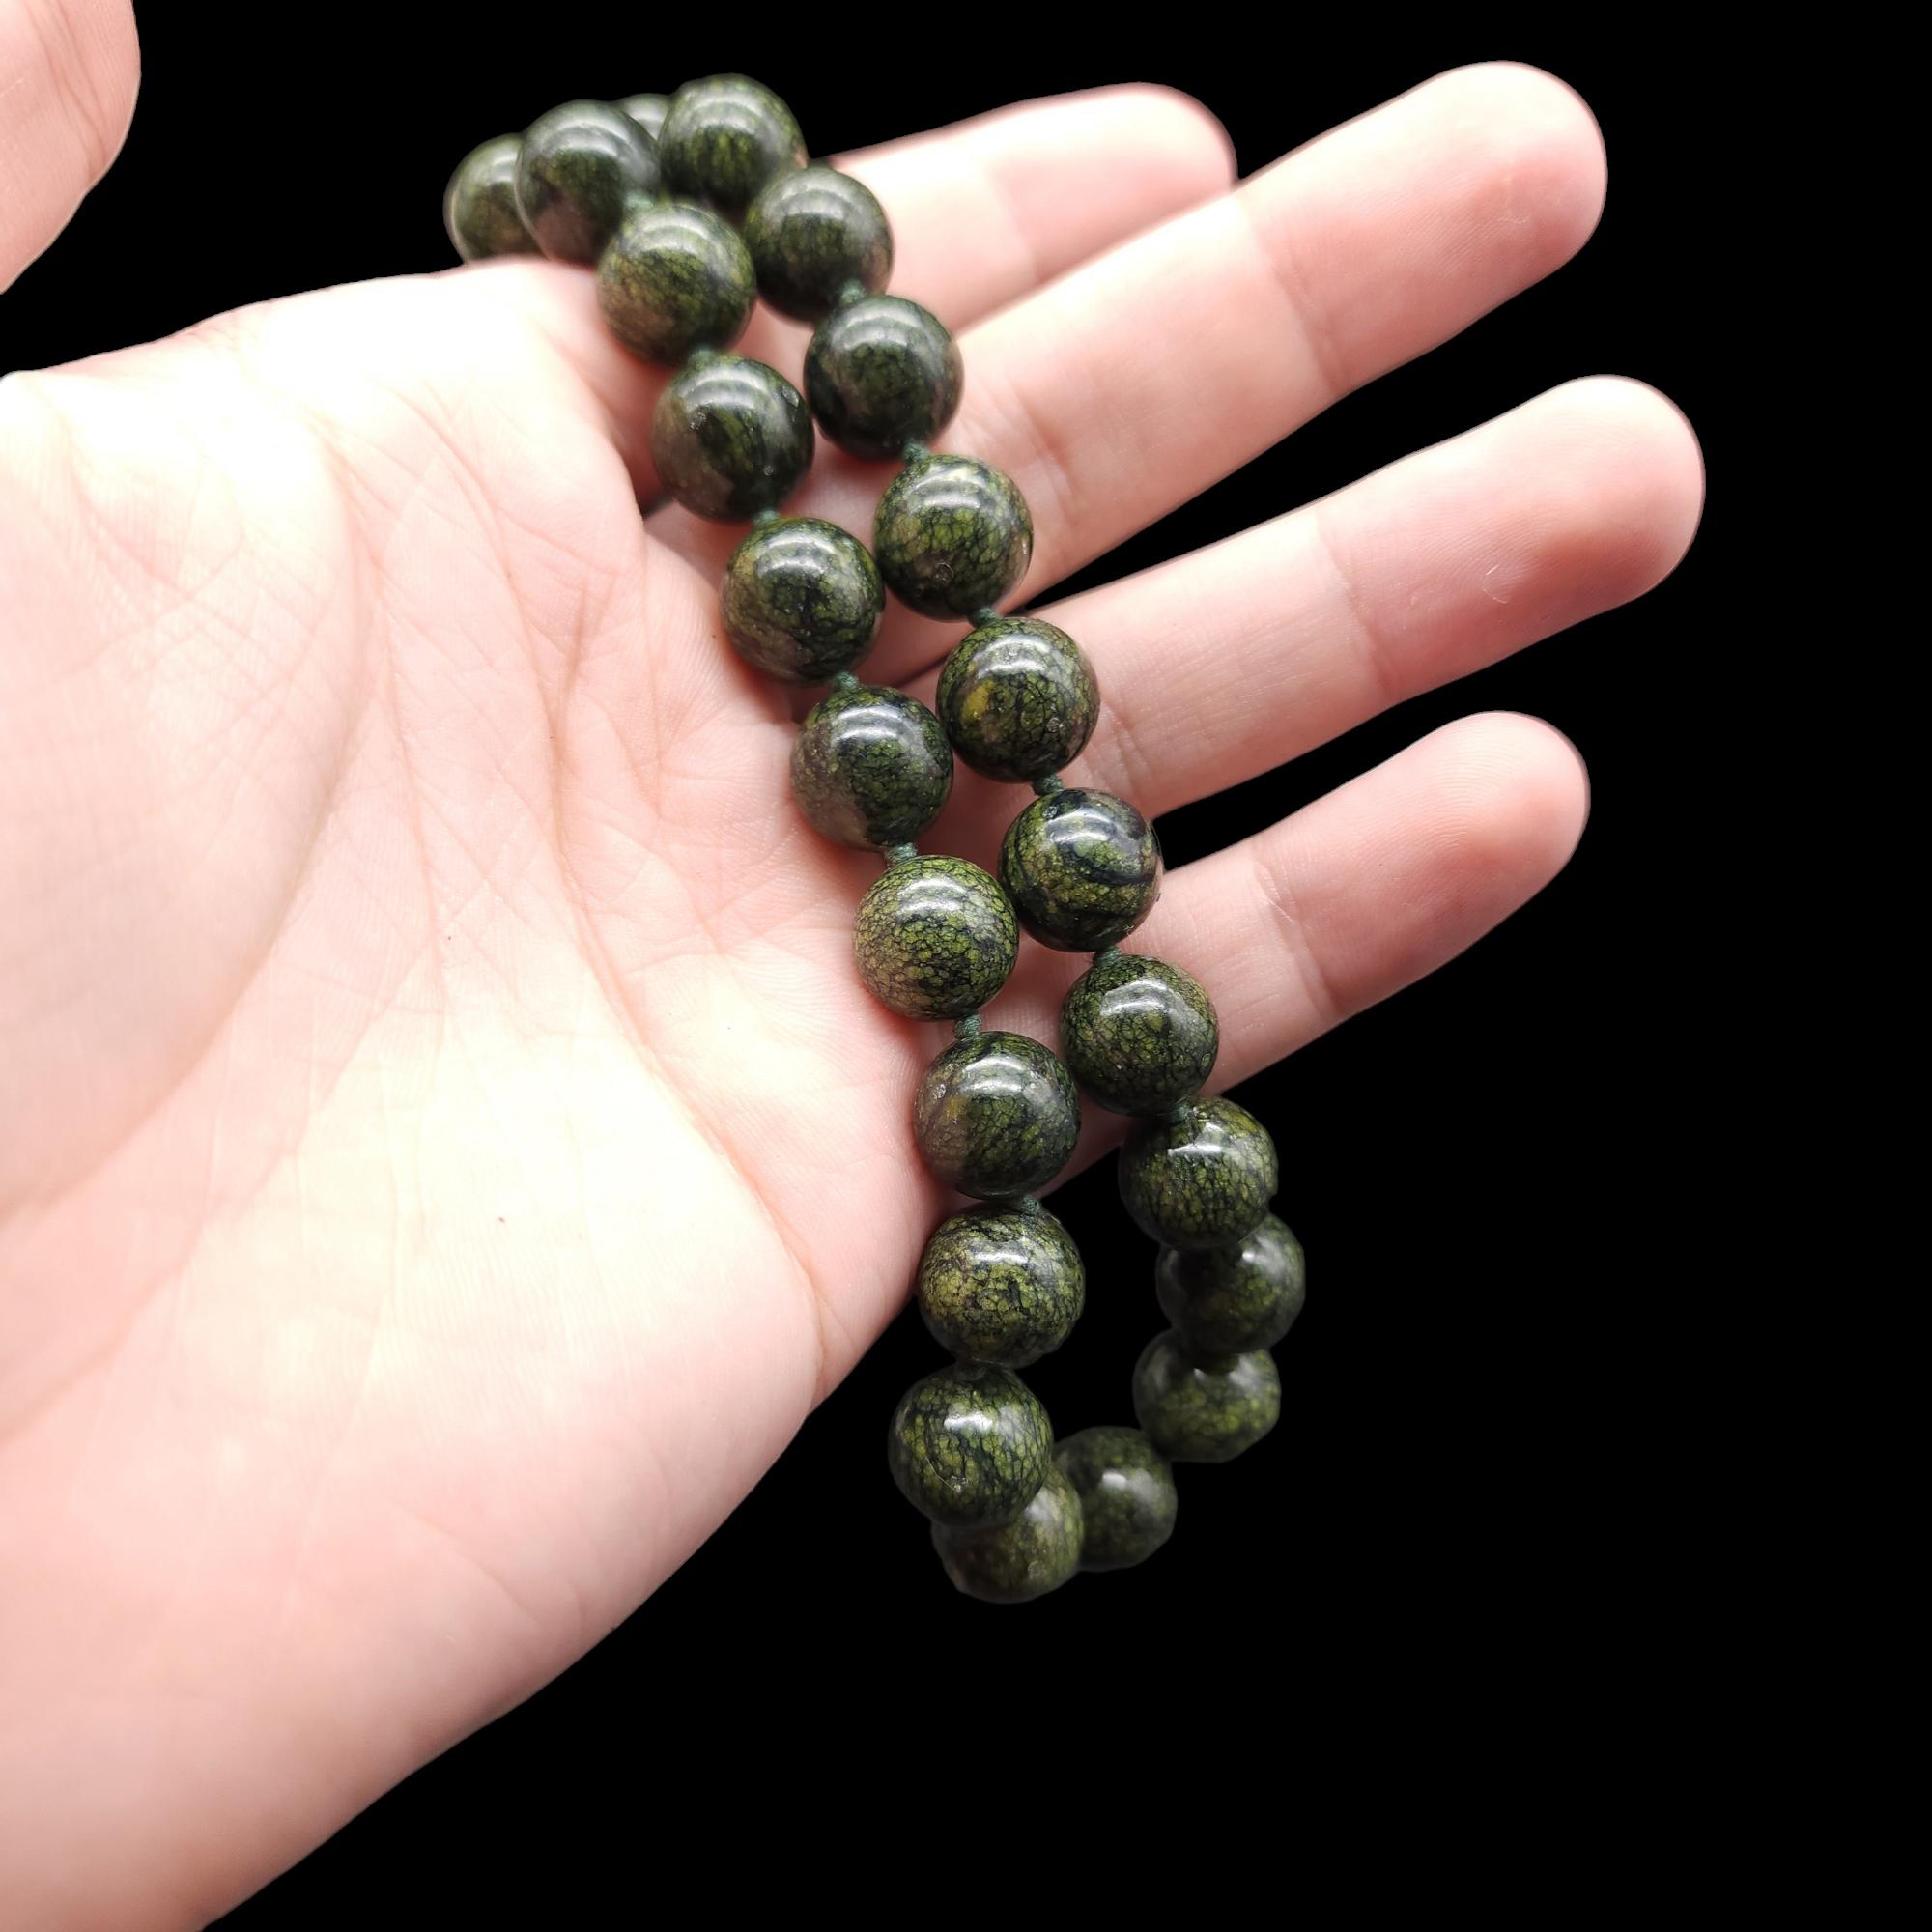 Polished Jade Bead Necklace, Sterling Silver Clasp, Vintage, Collar In Excellent Condition For Sale In Milford, DE